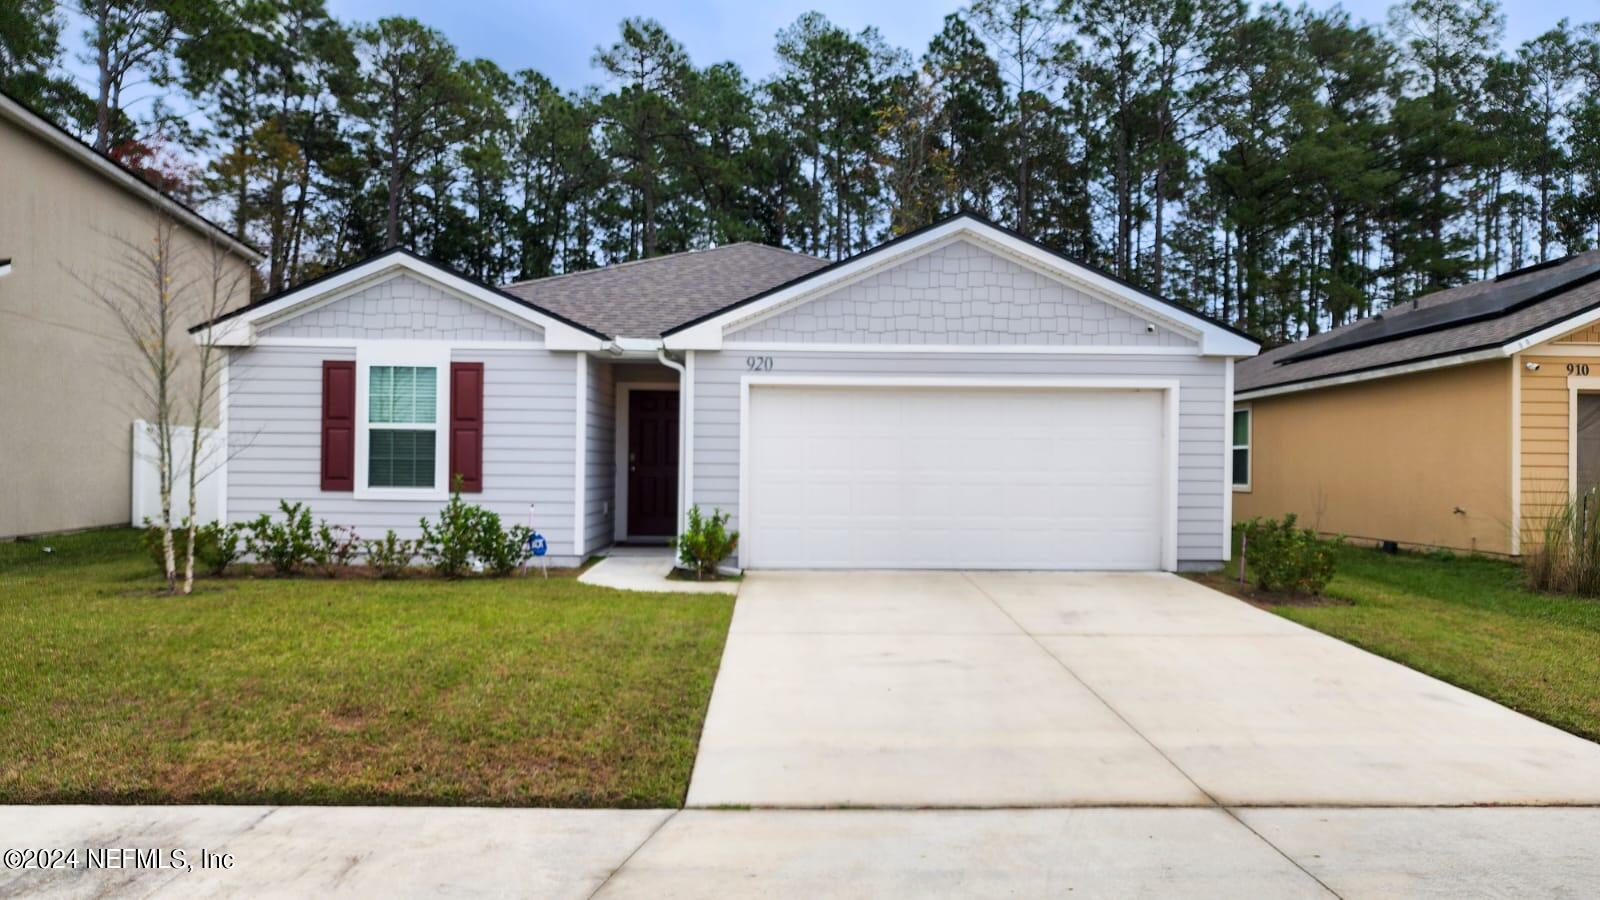 Middleburg, FL home for sale located at 920 RILEY Road, Middleburg, FL 32068